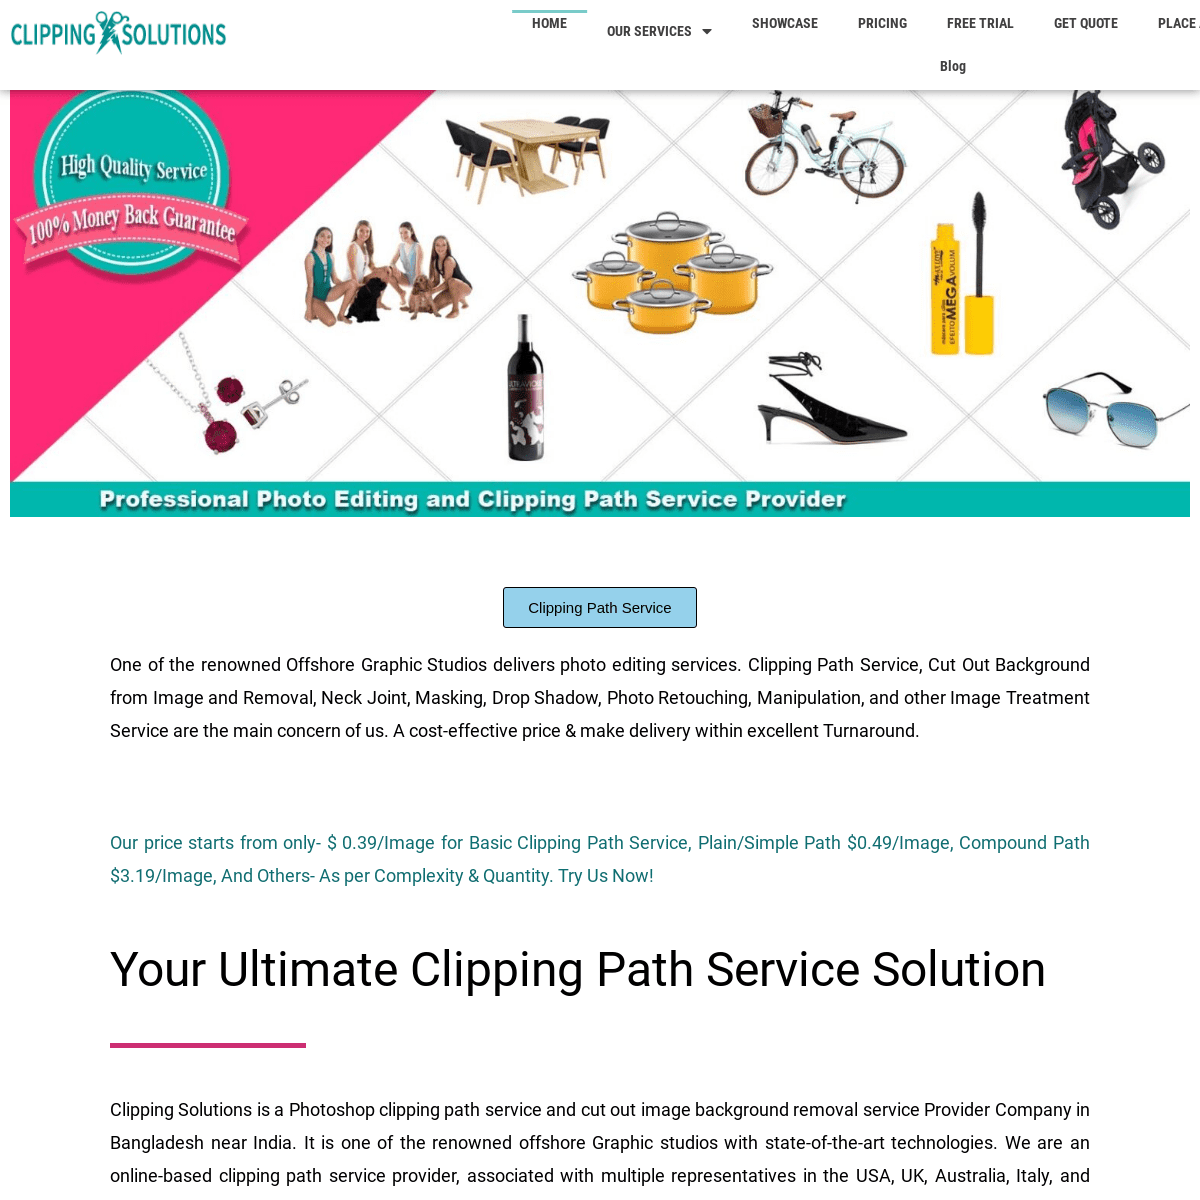 A complete backup of clippingsolutions.com